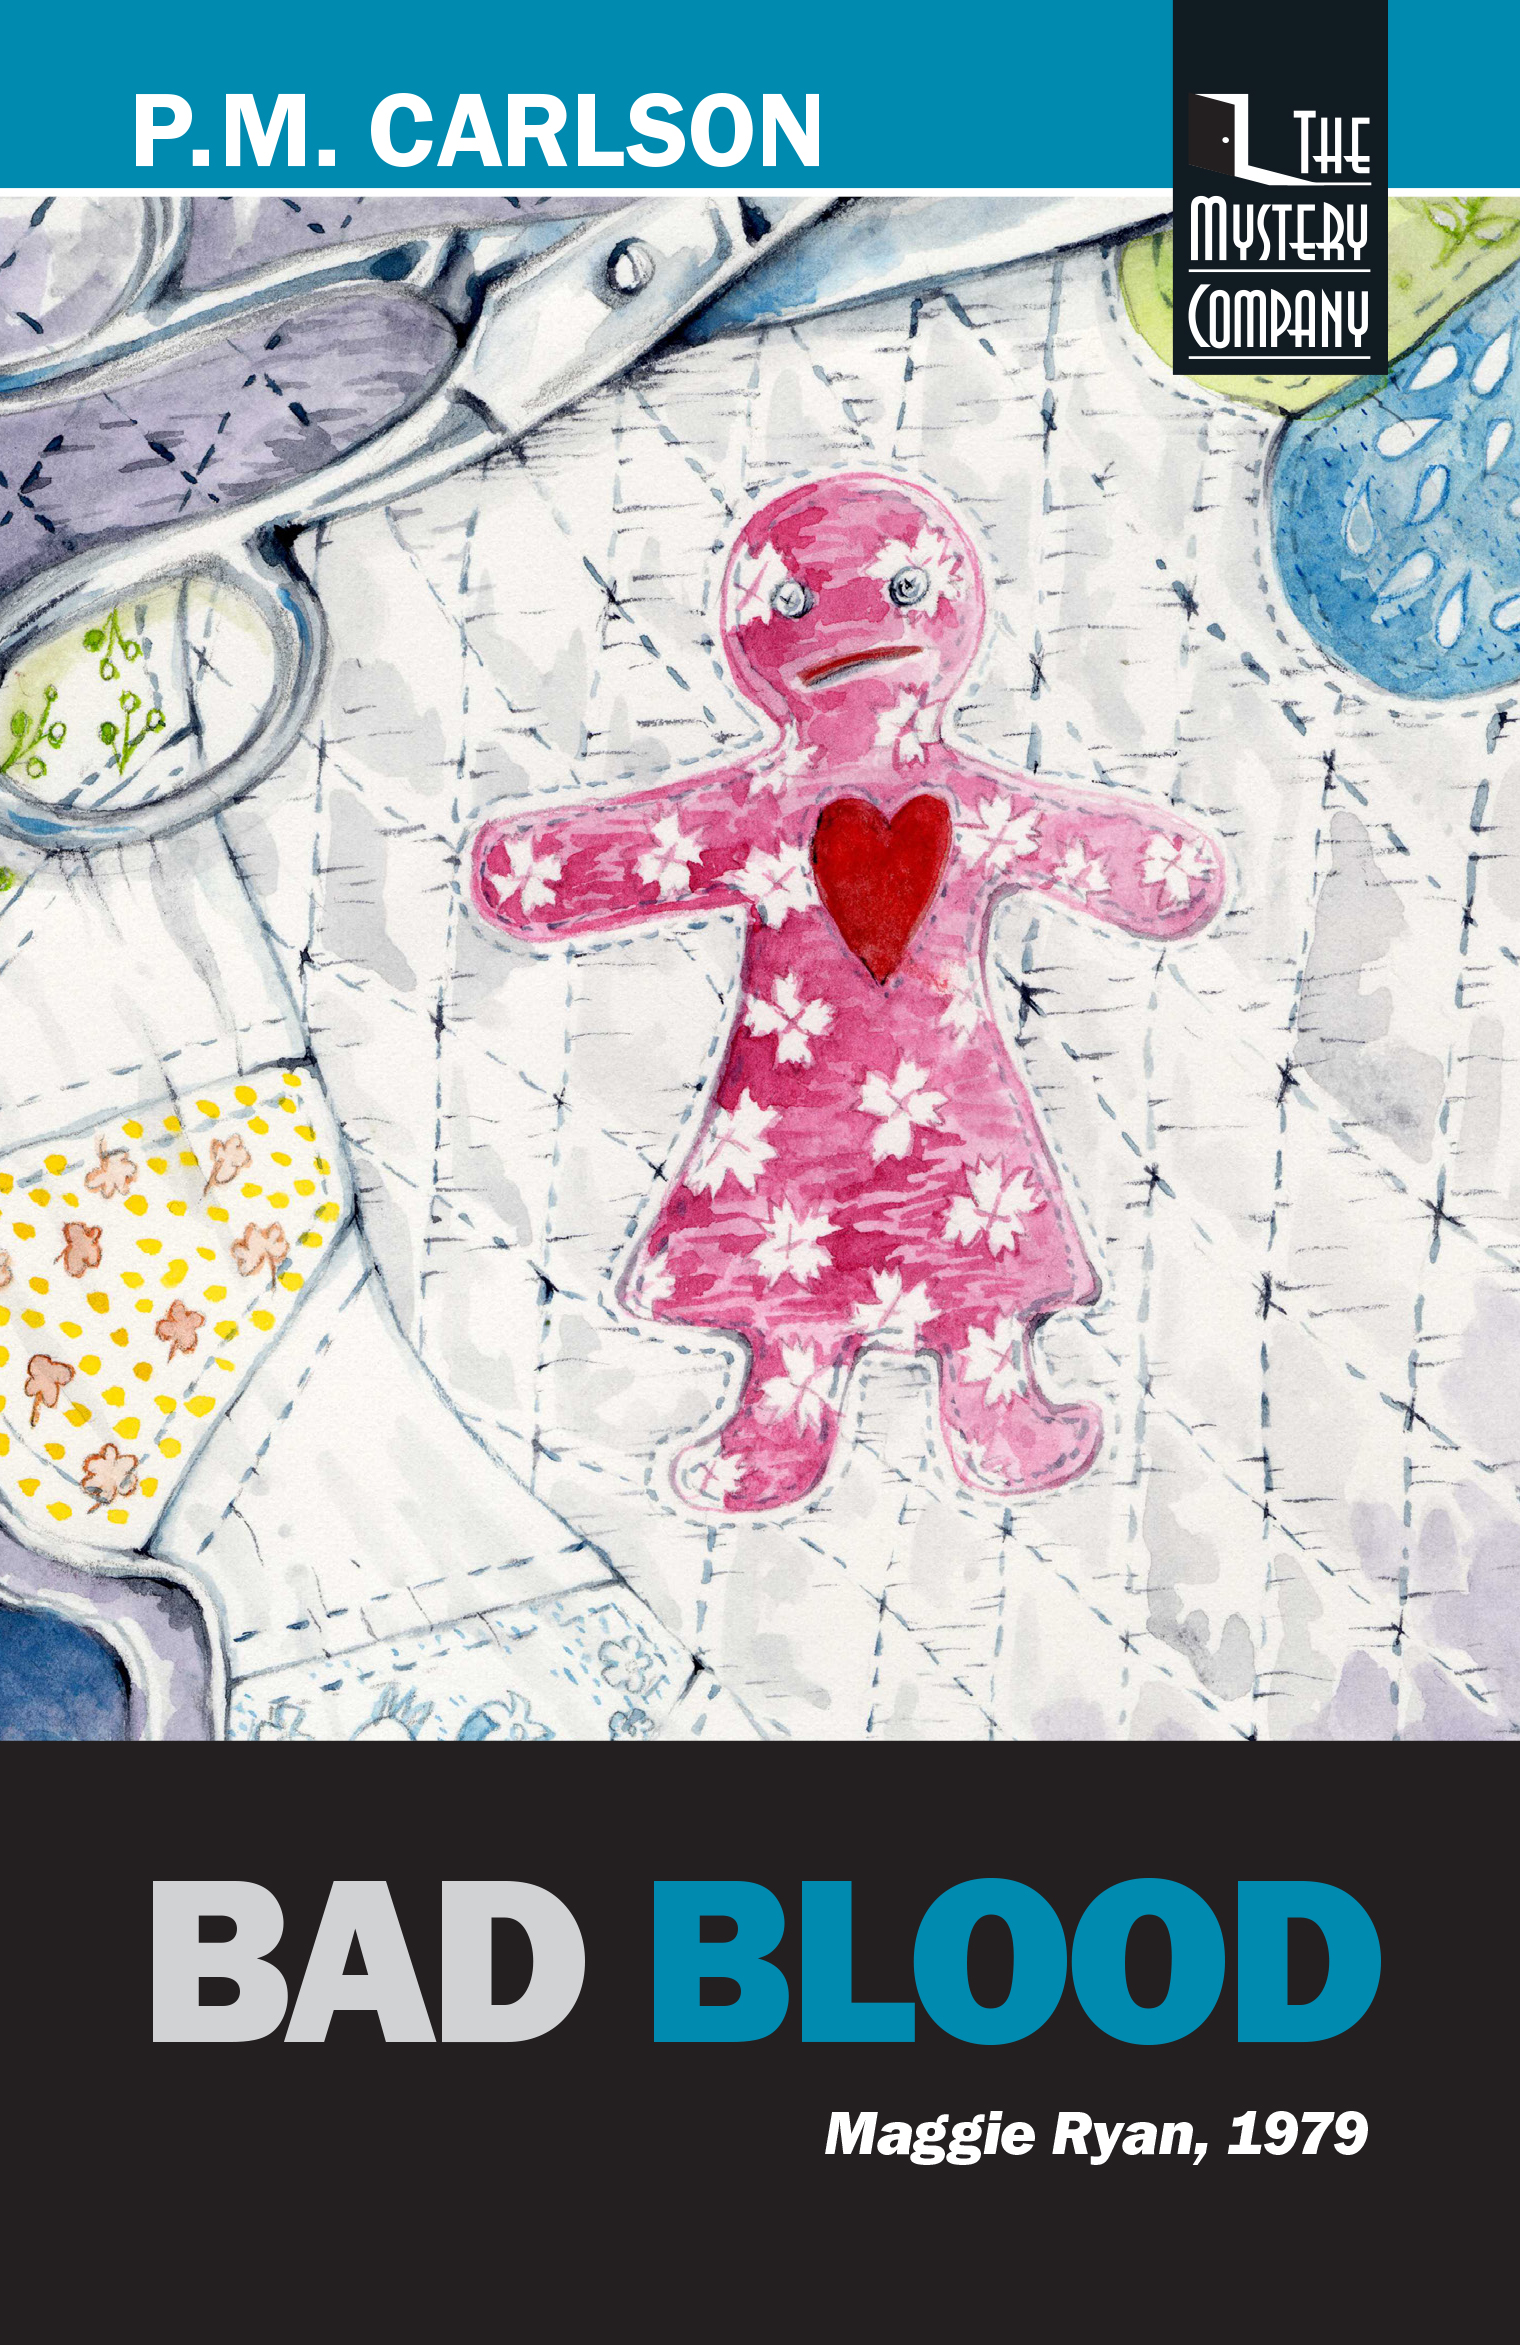 Bad Blood by P.M. Carlson